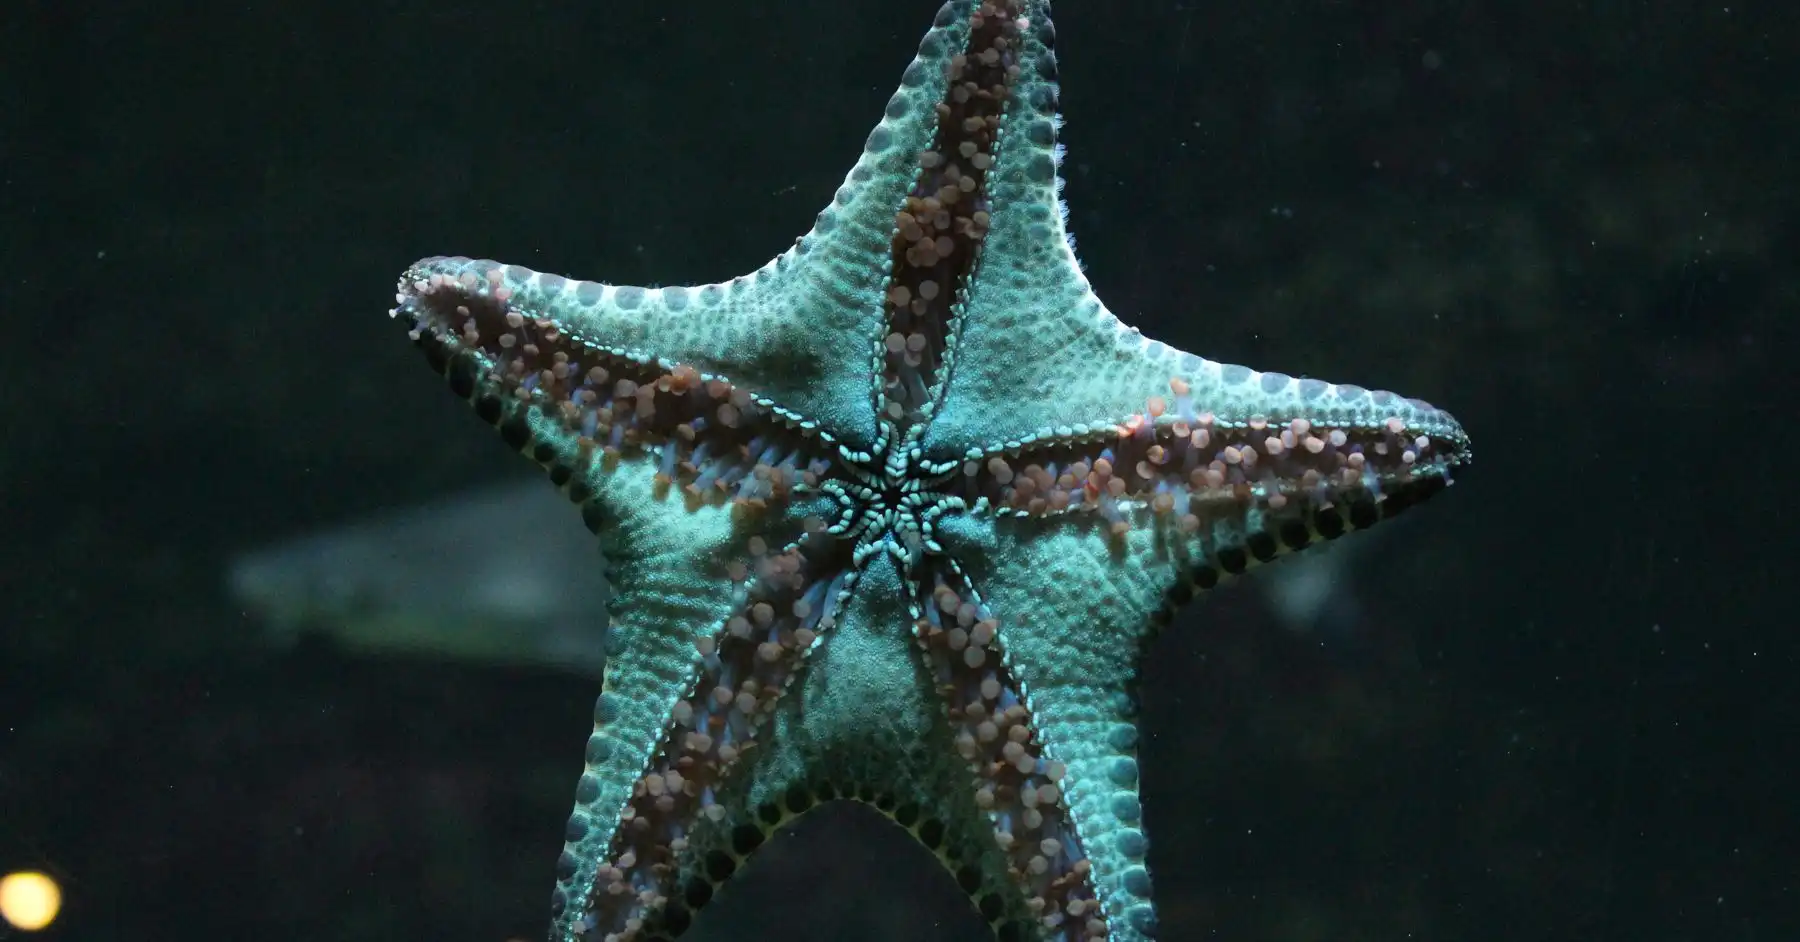 How to feed starfish in home aquarium